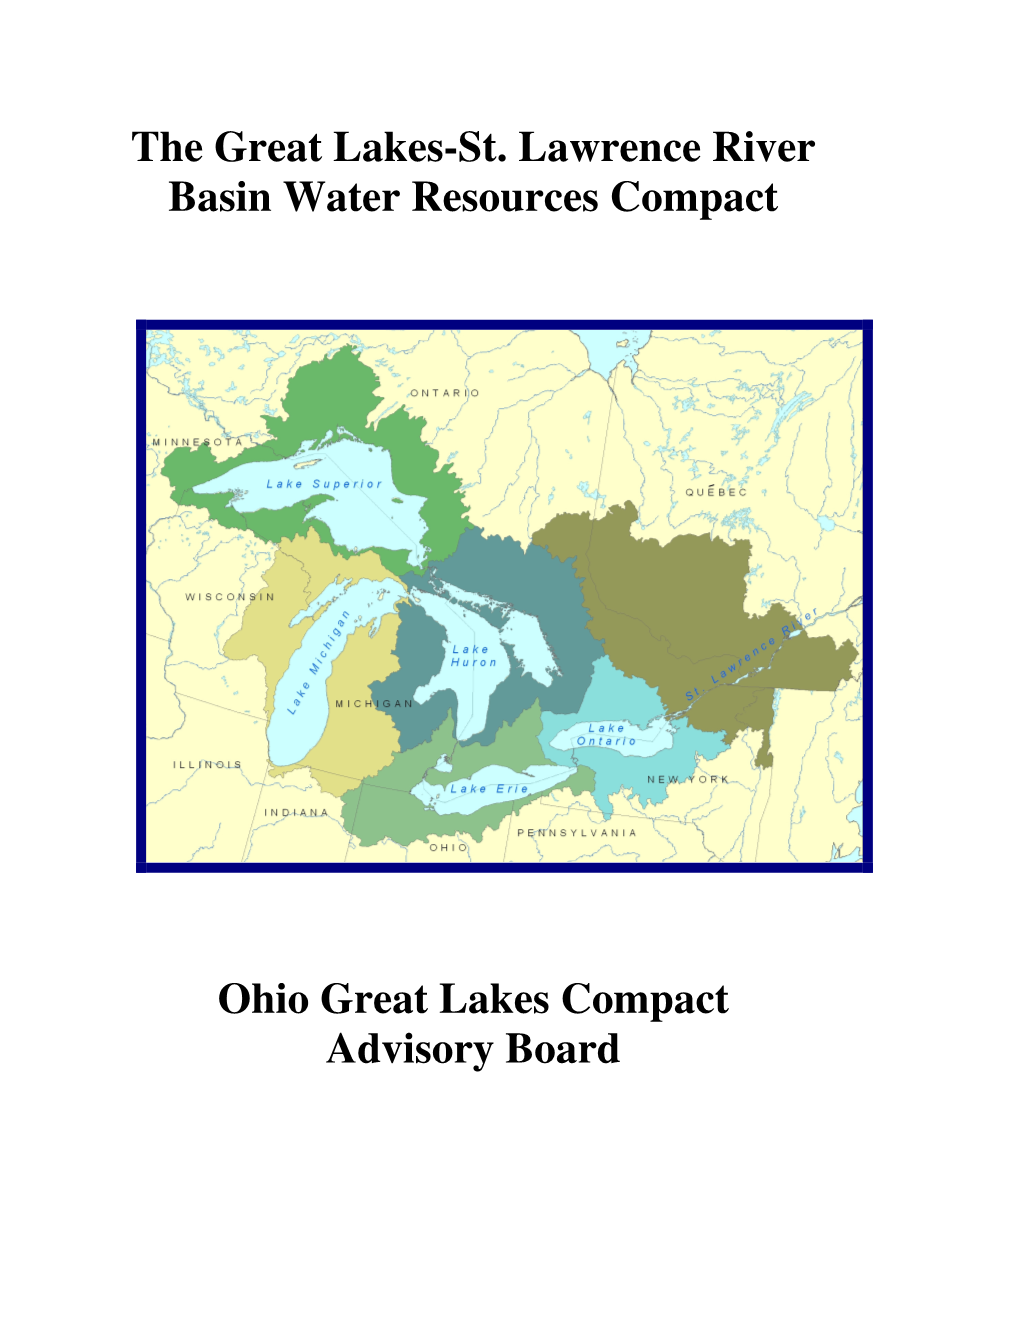 The Great Lakes-St. Lawrence River Basin Water Resources Compact